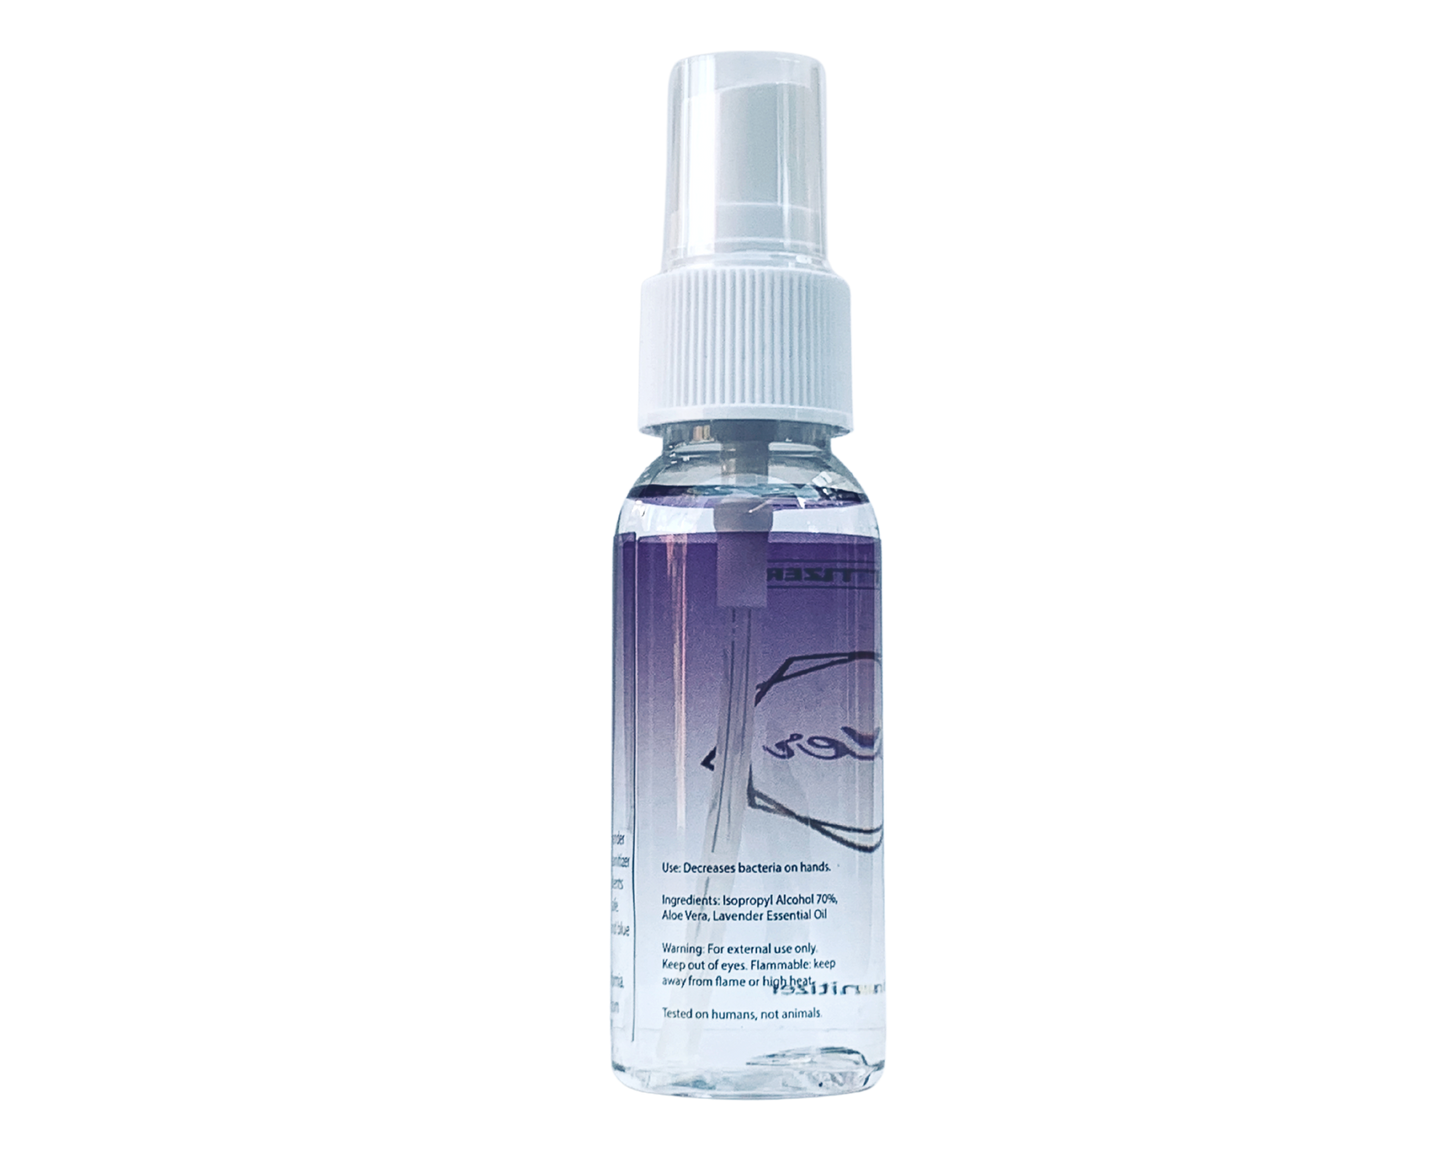 Hand Sanitizer Spray - Lavender Scented - with Aloe & Essential Oils by Sunshine & Sanitizer